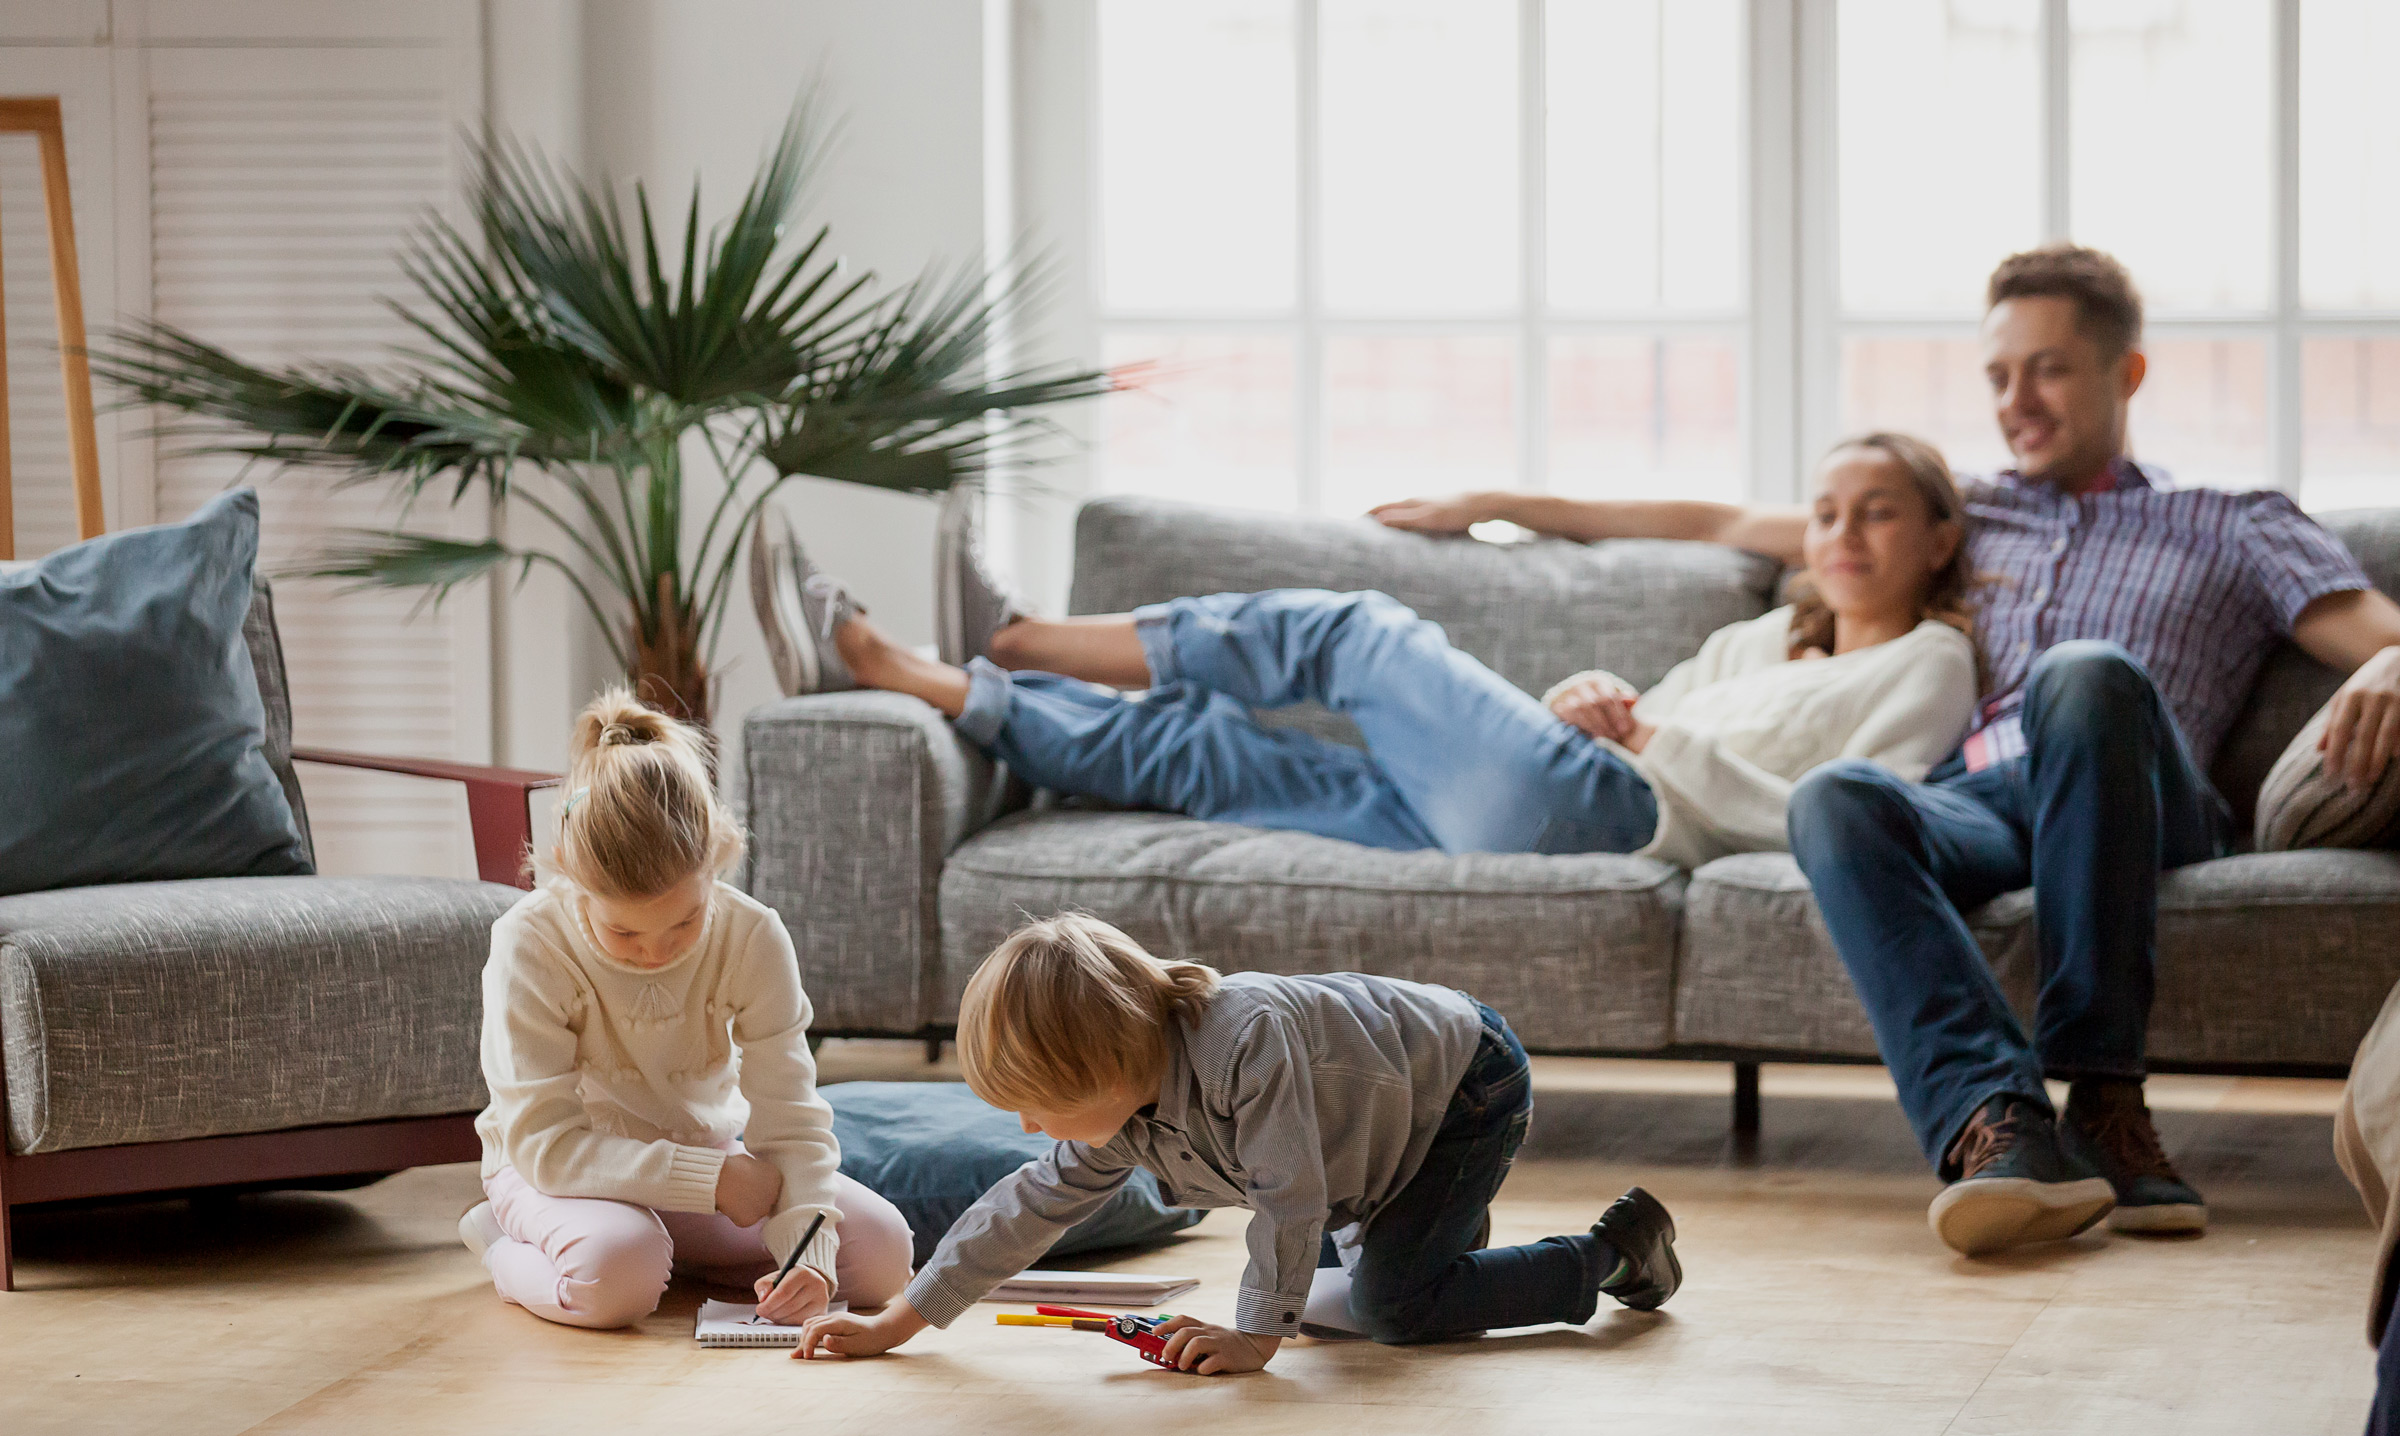 Family sitting in living room inside comfortable home